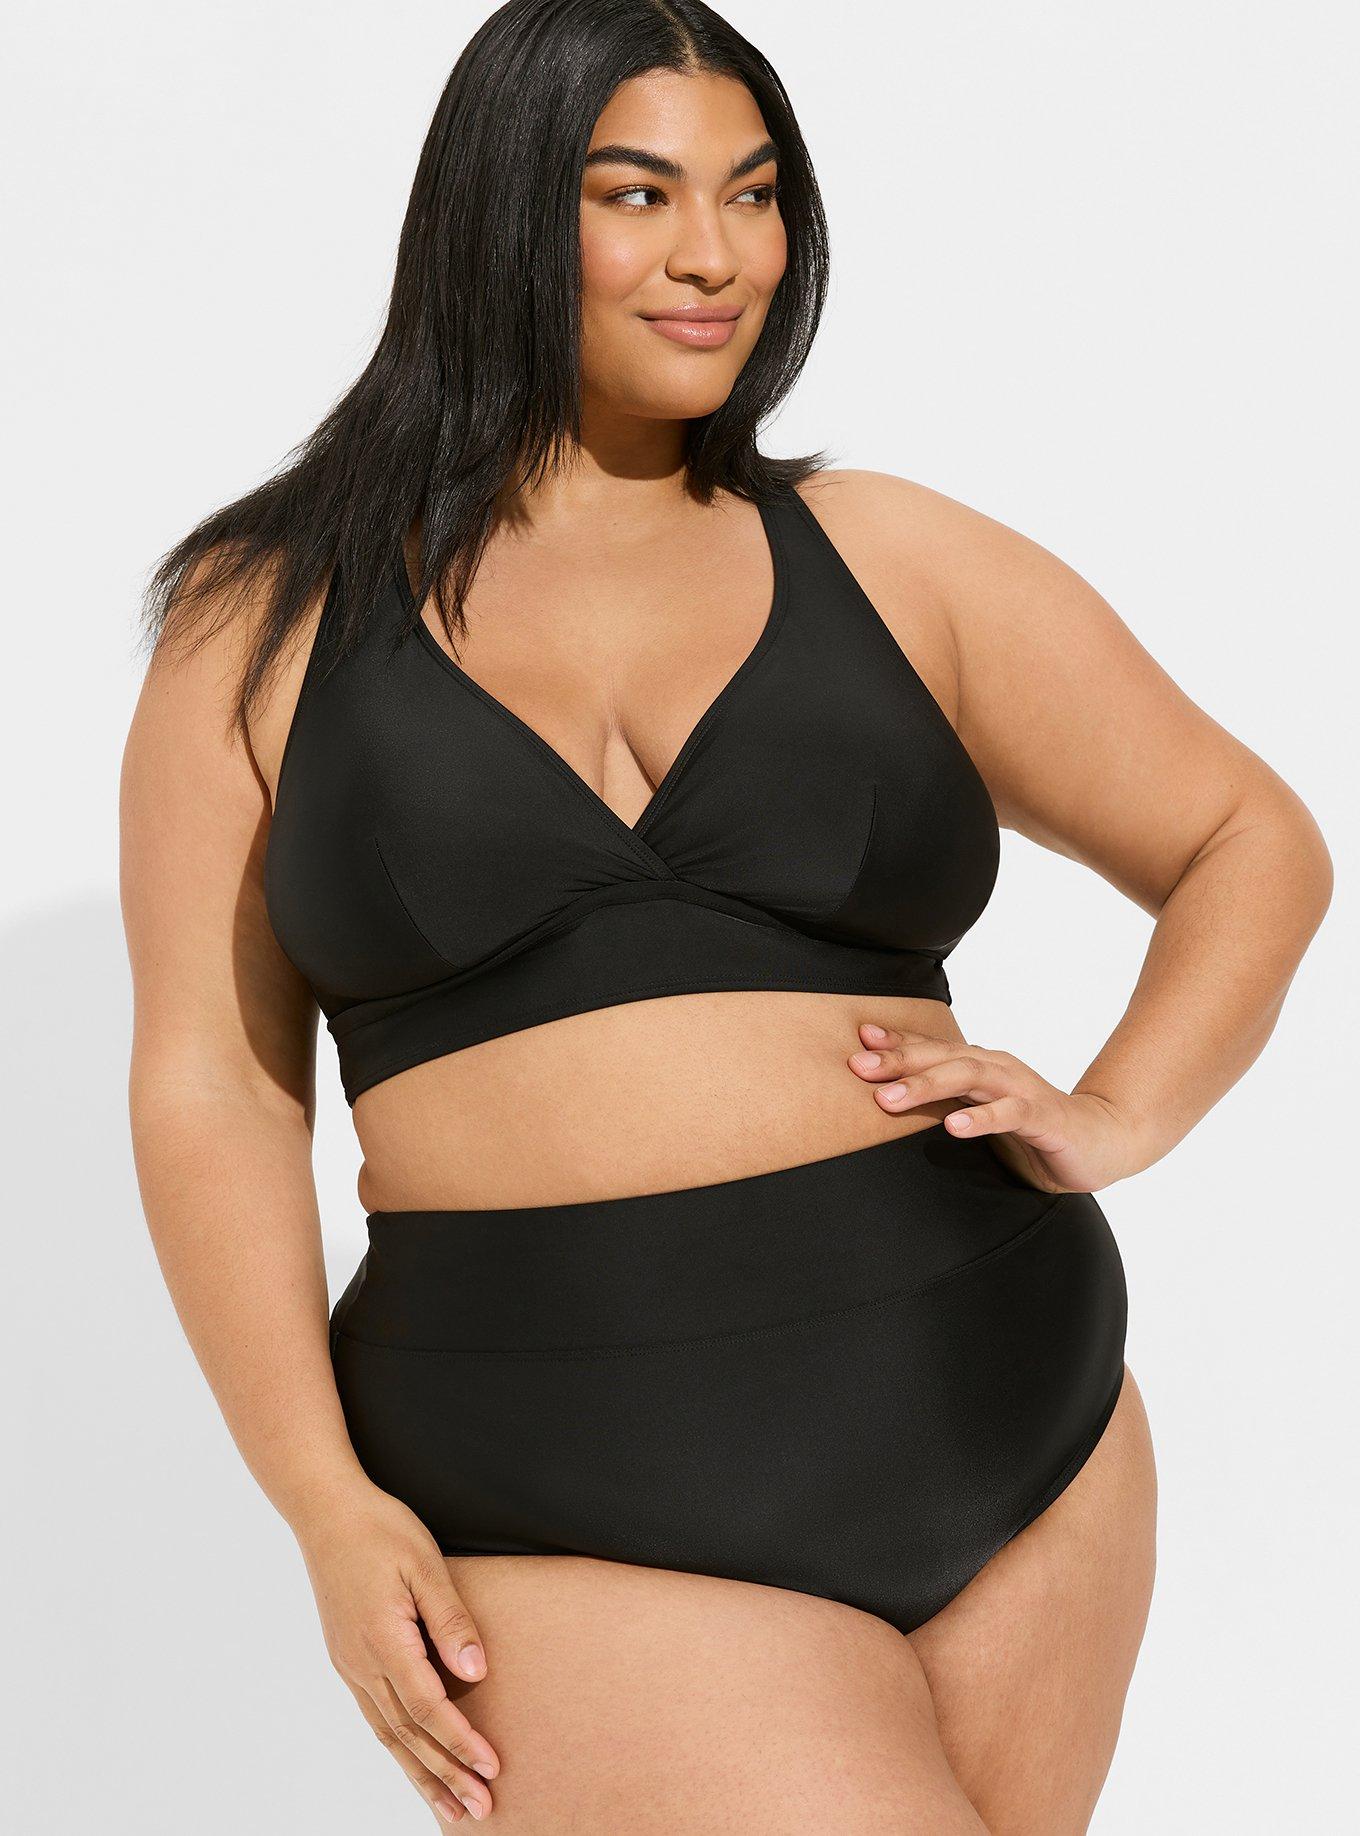 Plus Size Swimwear, Swimsuits and Bathing Suits